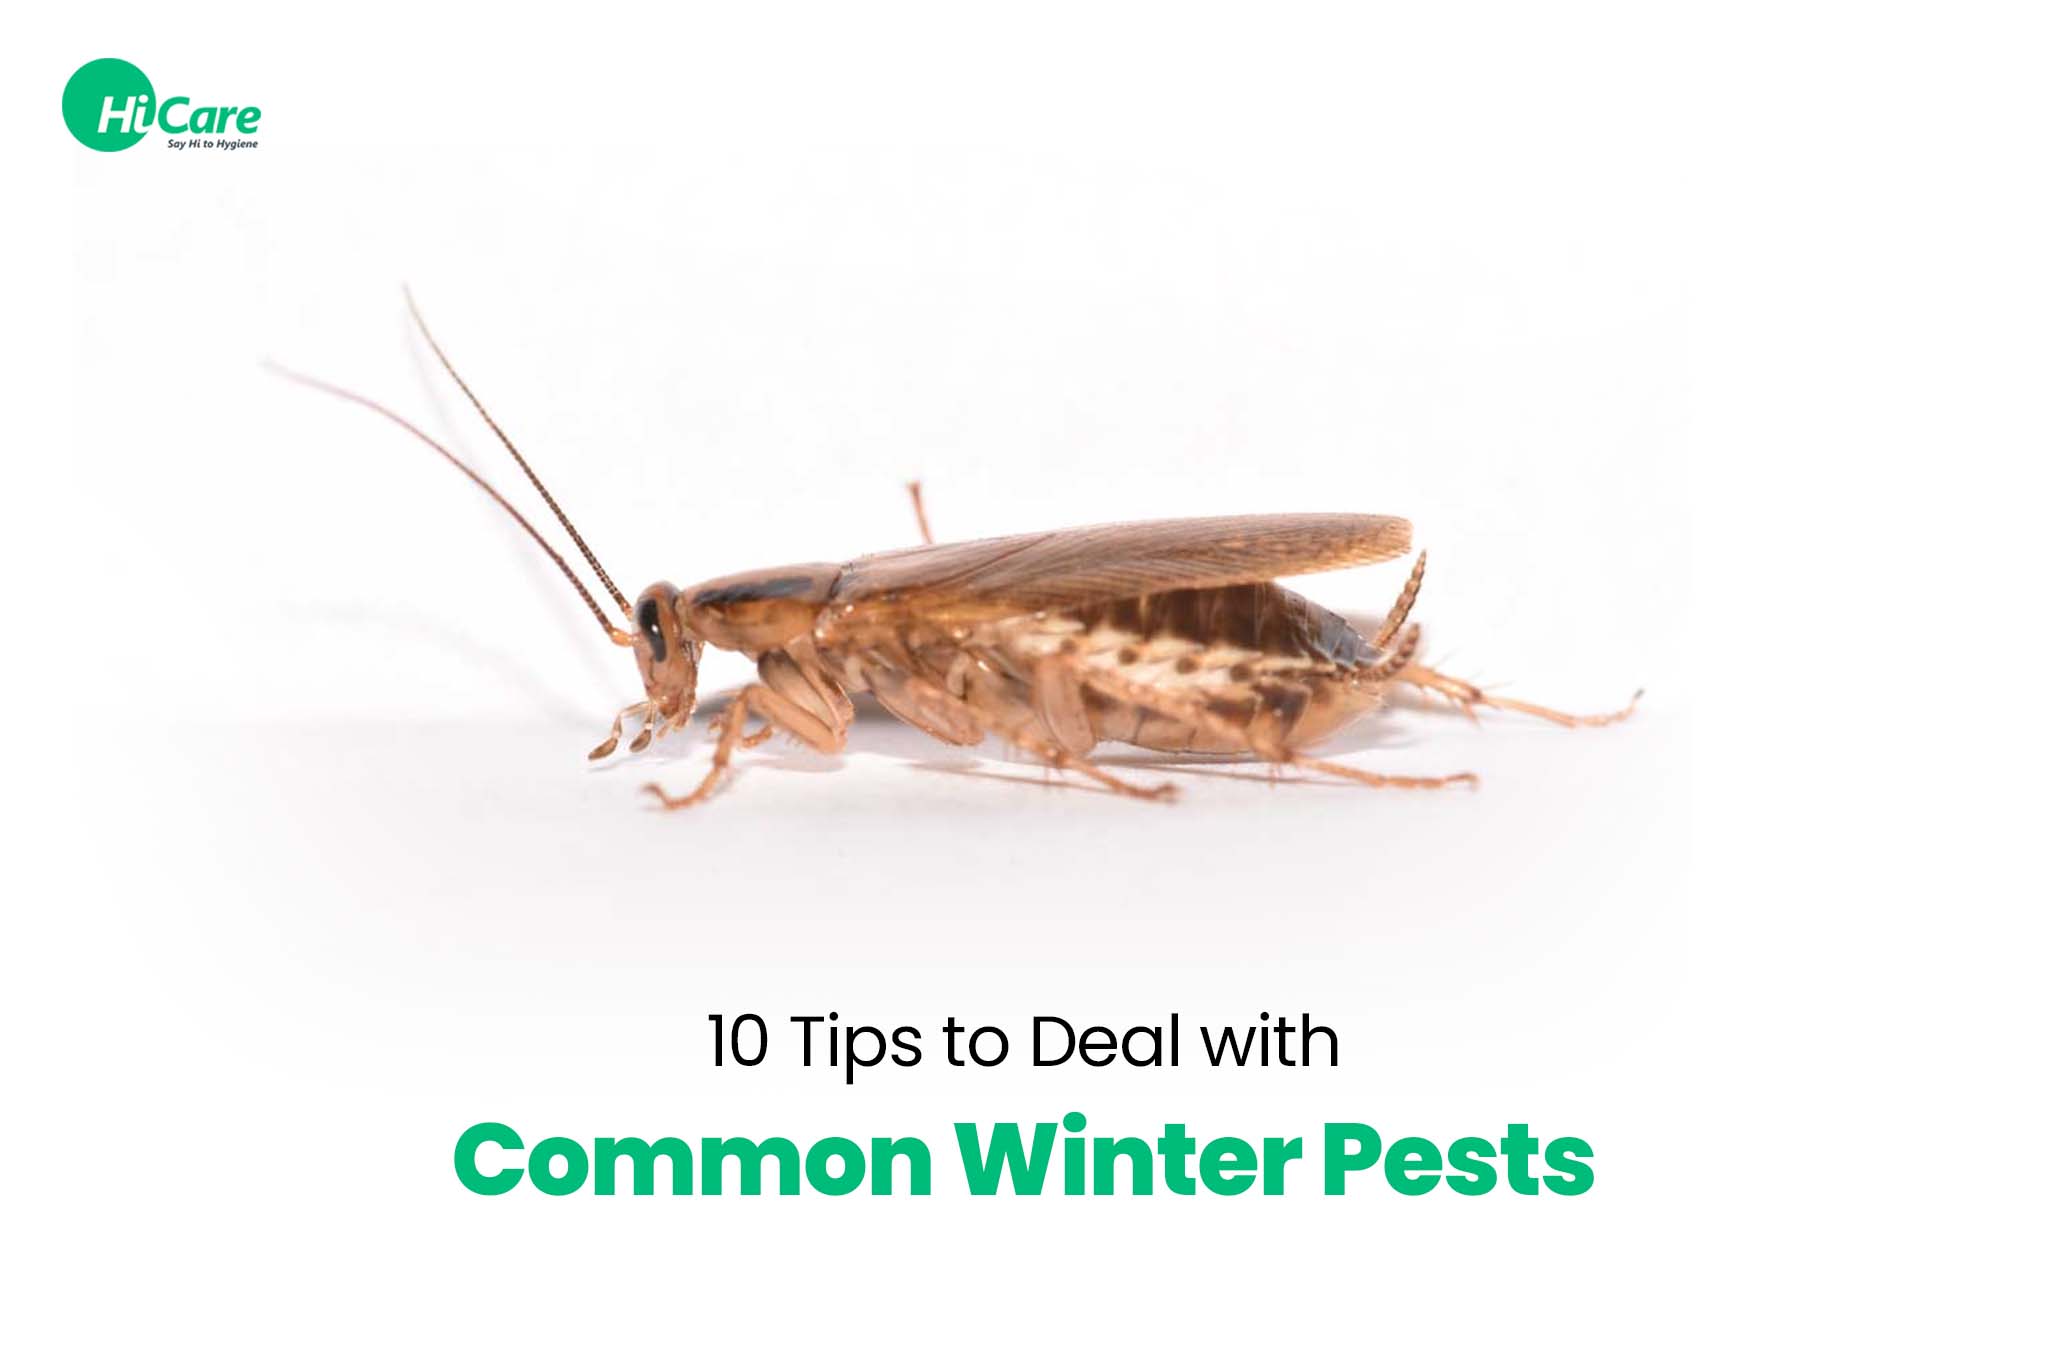 10 Tips to Deal with Common Winter Pests